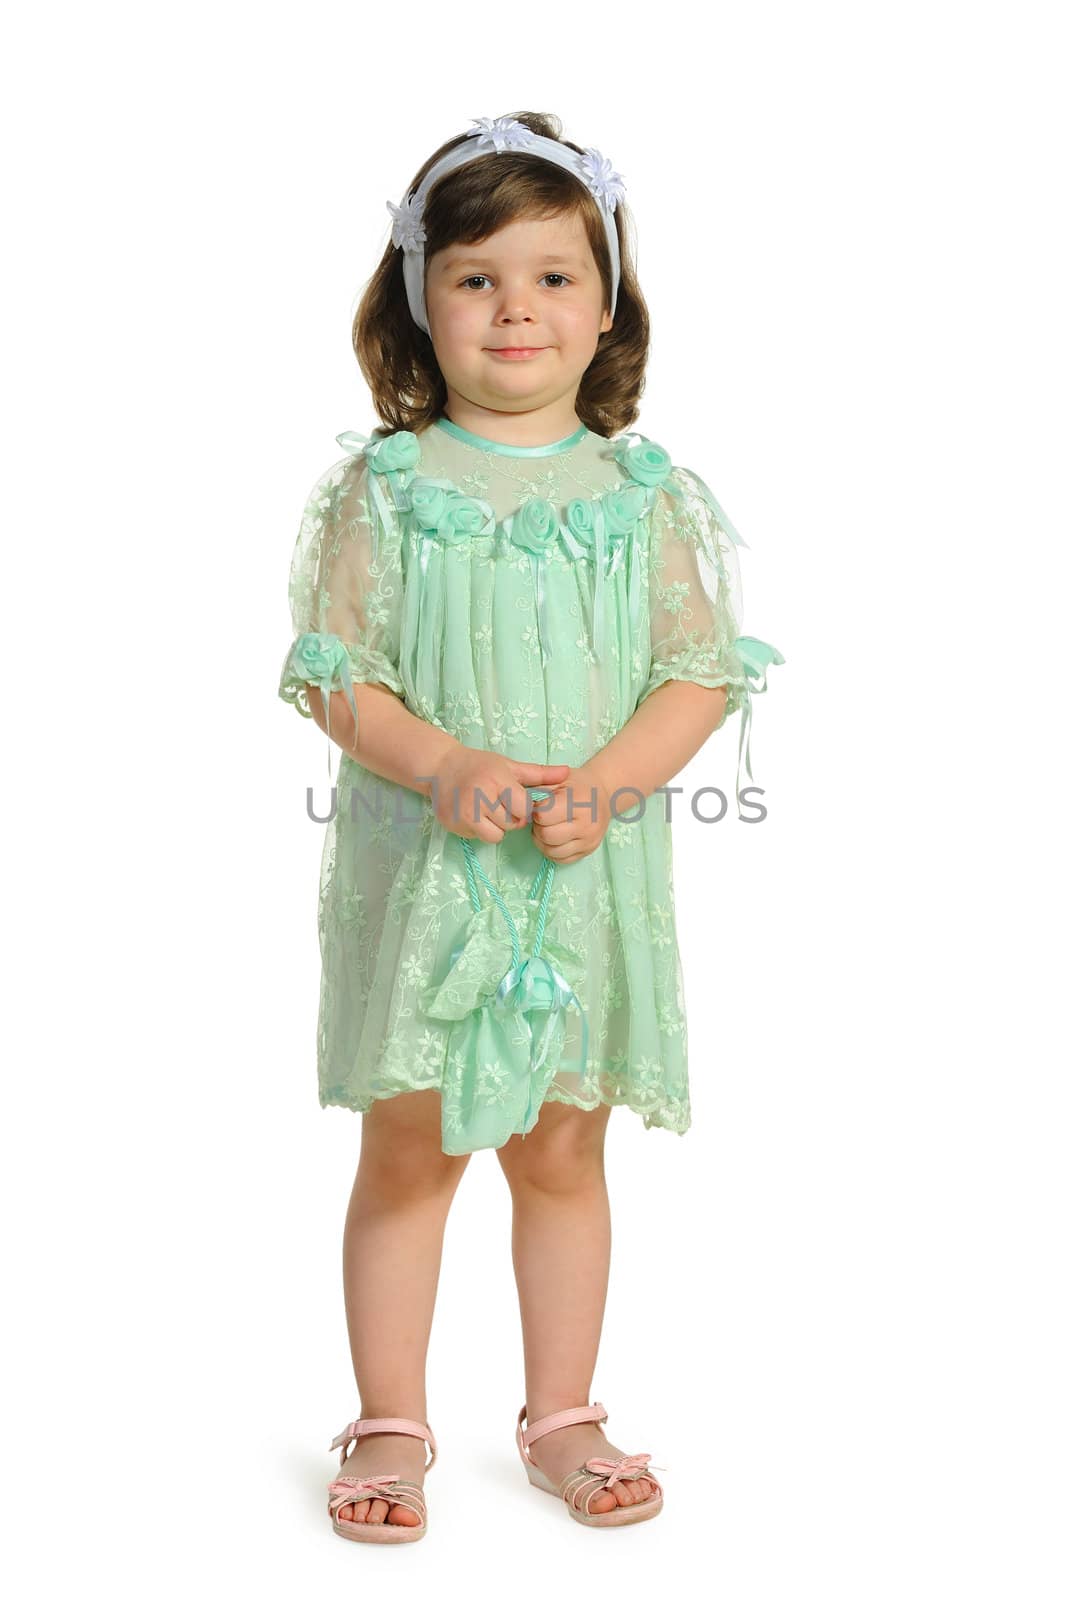 The lovely little girl in a green dress. It is isolated on a white background